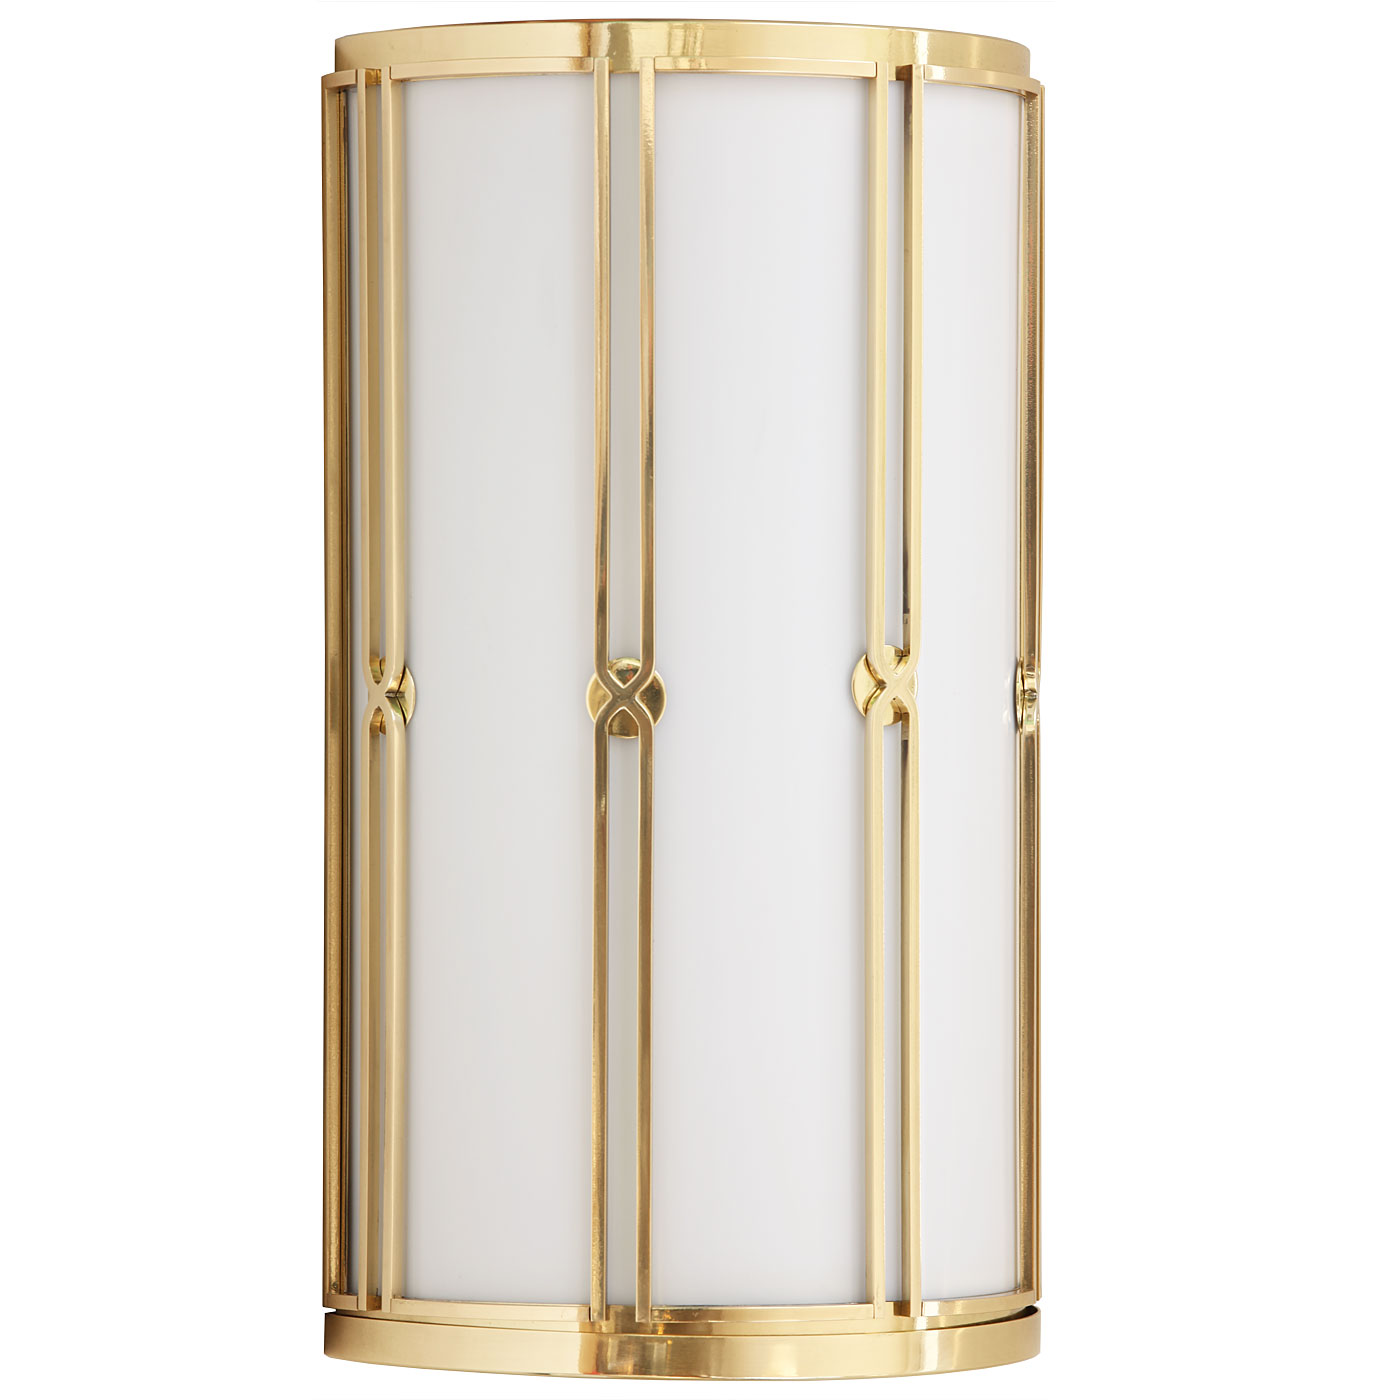 Classic Art déco Wall Light for Outdoors